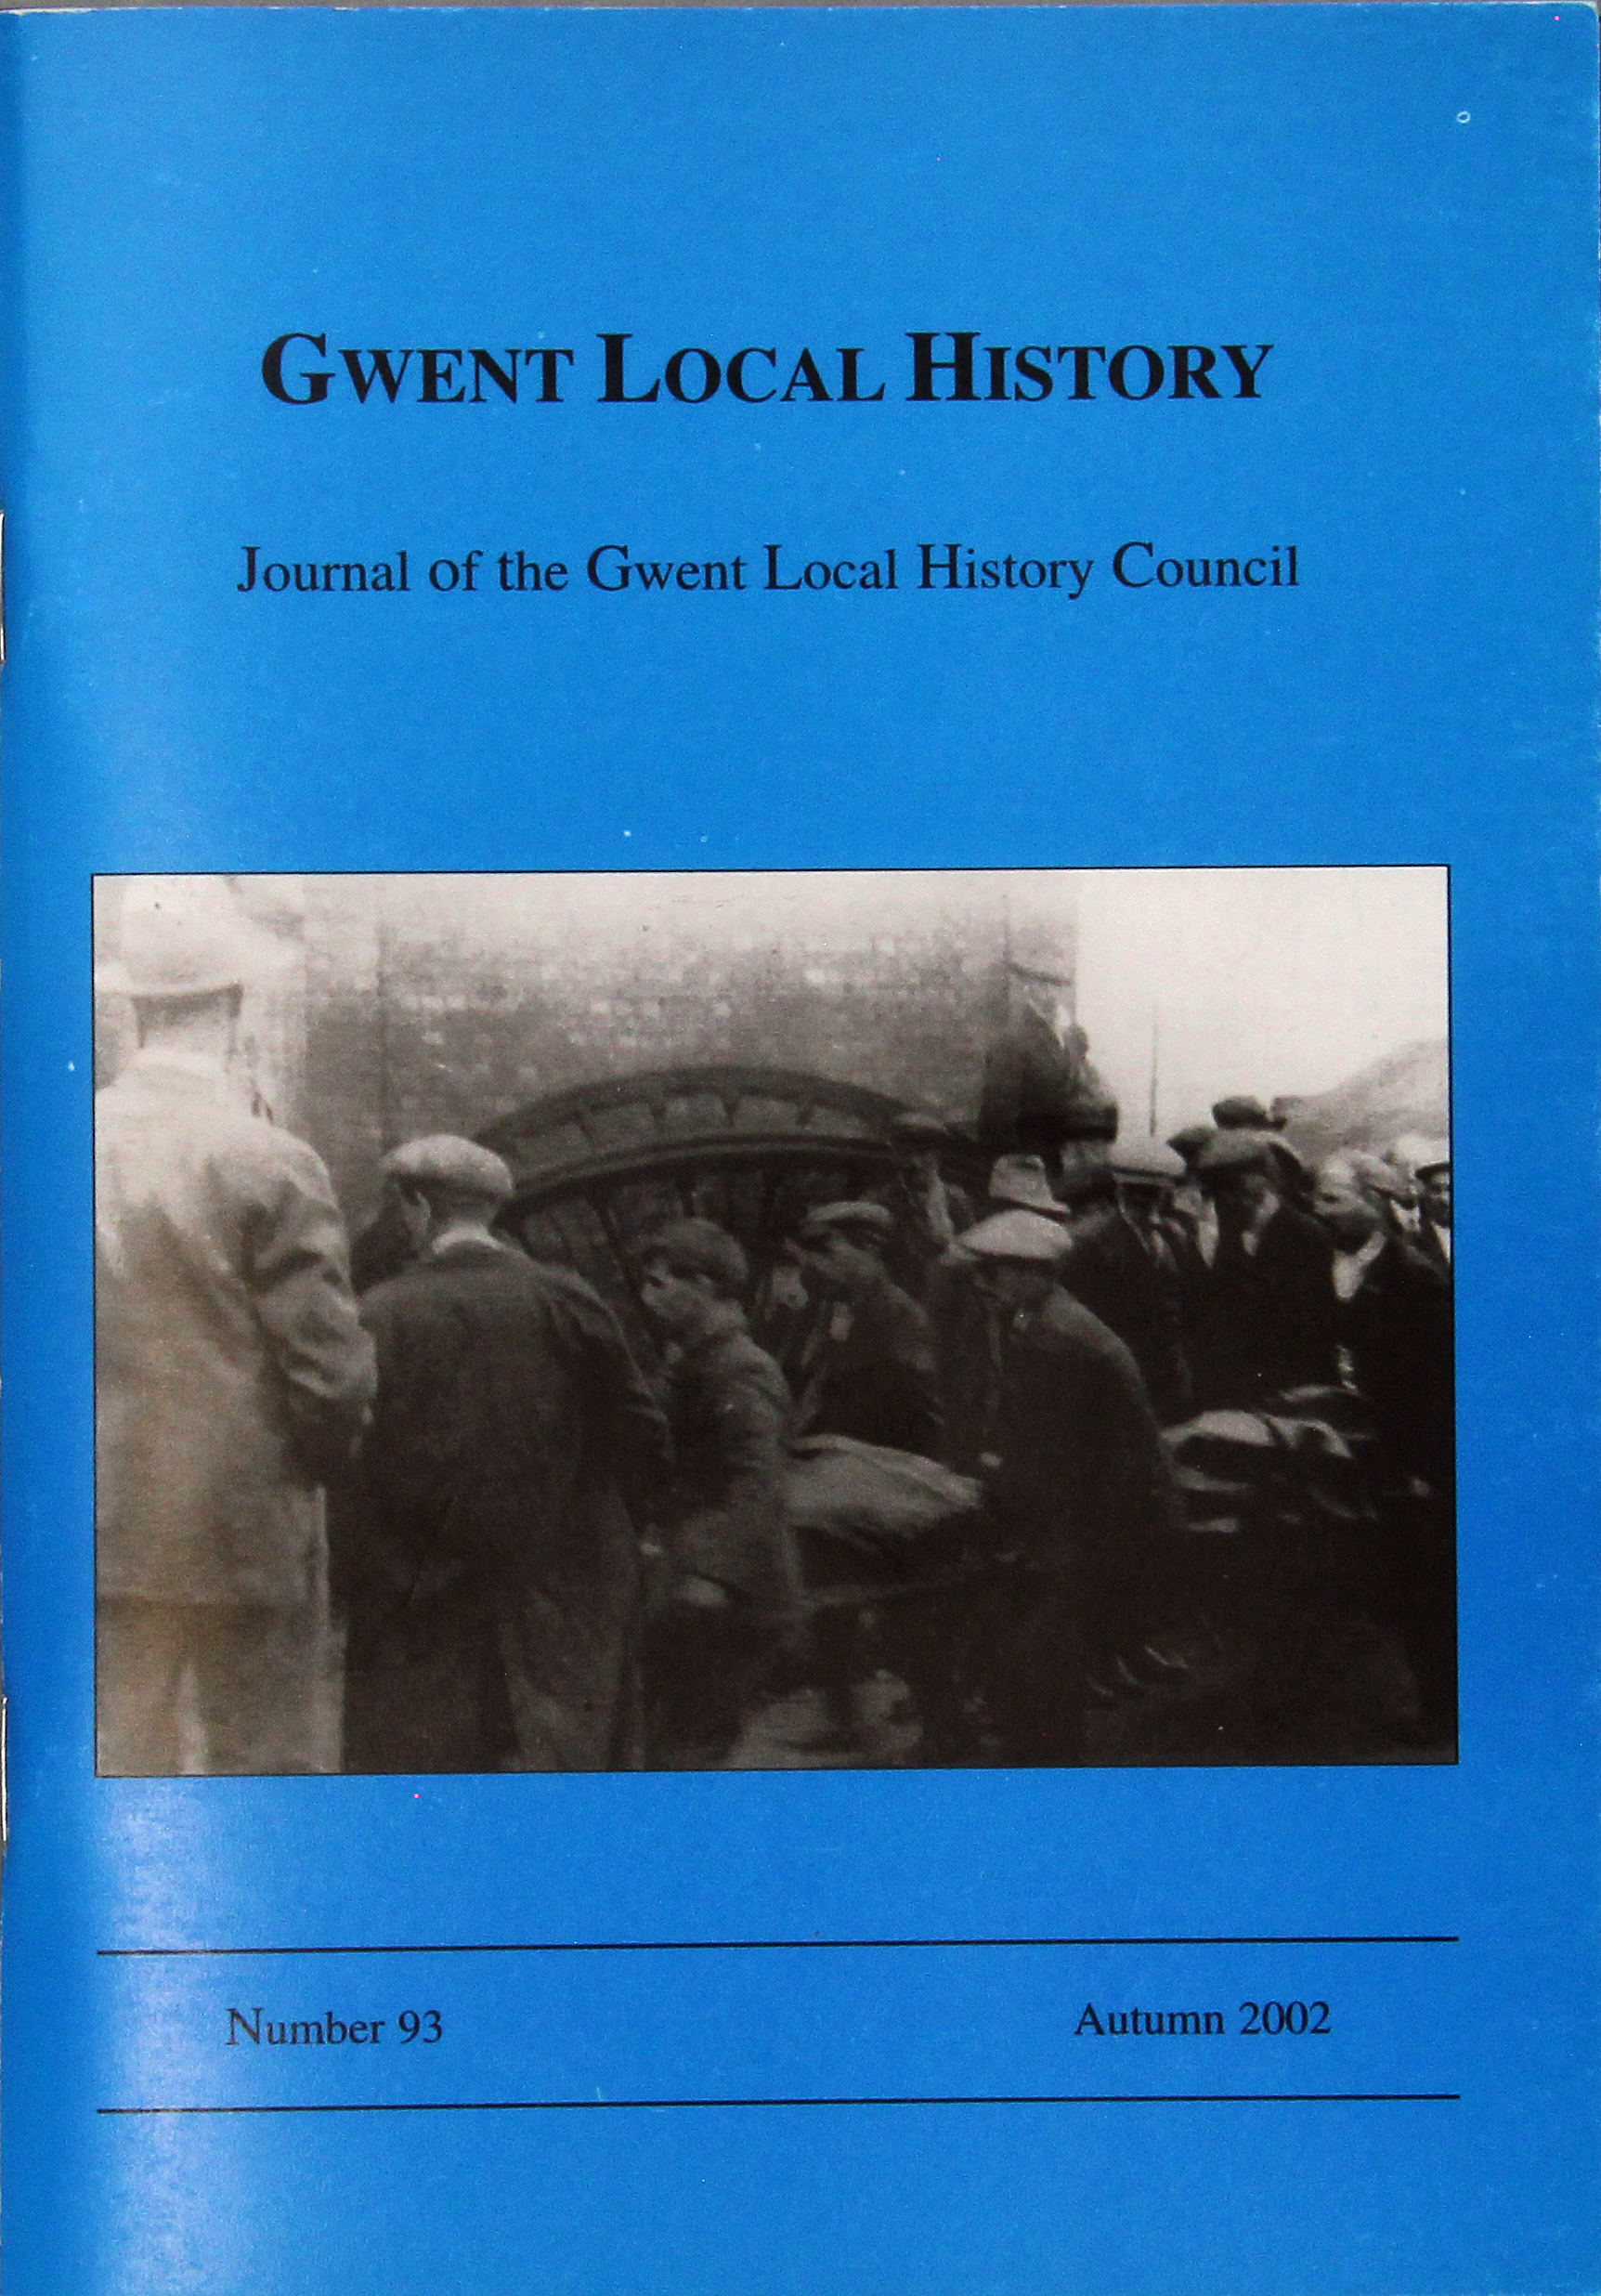 Gwent Local History: Journal of the Gwent Local History Council No.93, Autumn 2003, £2.00